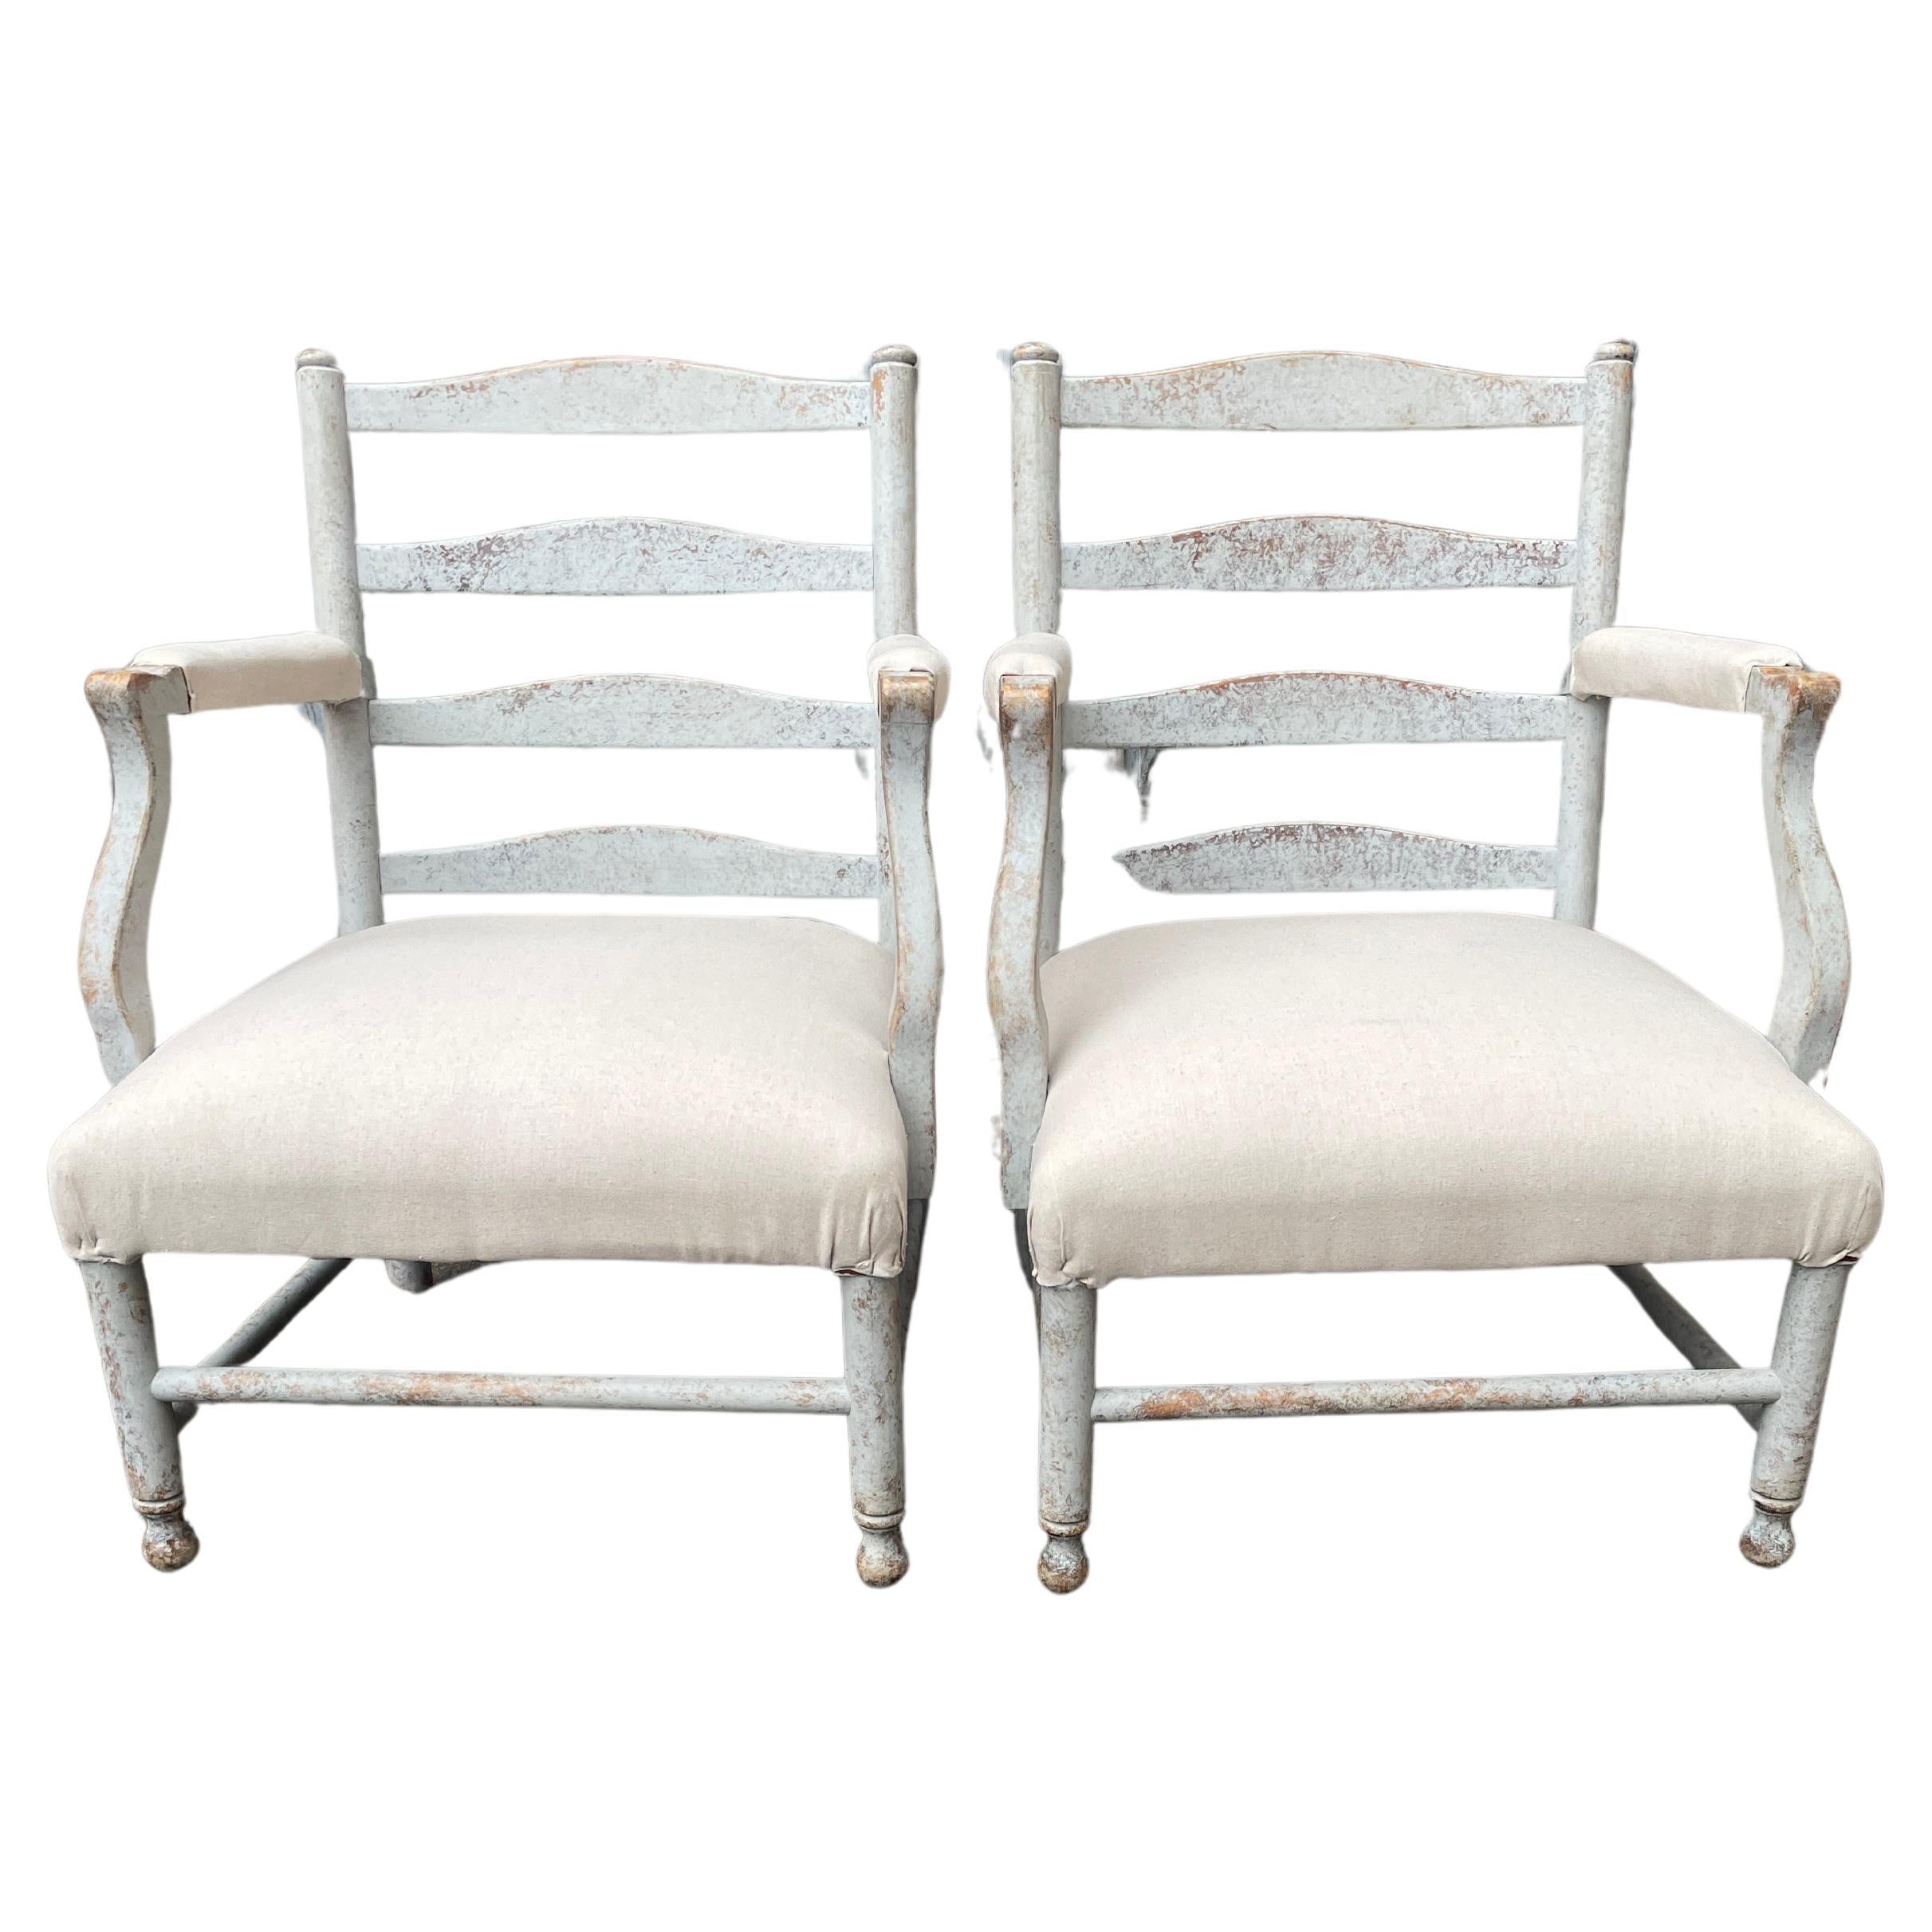 Pair of Late 19th Century Swedish Gripsholm Armchairs